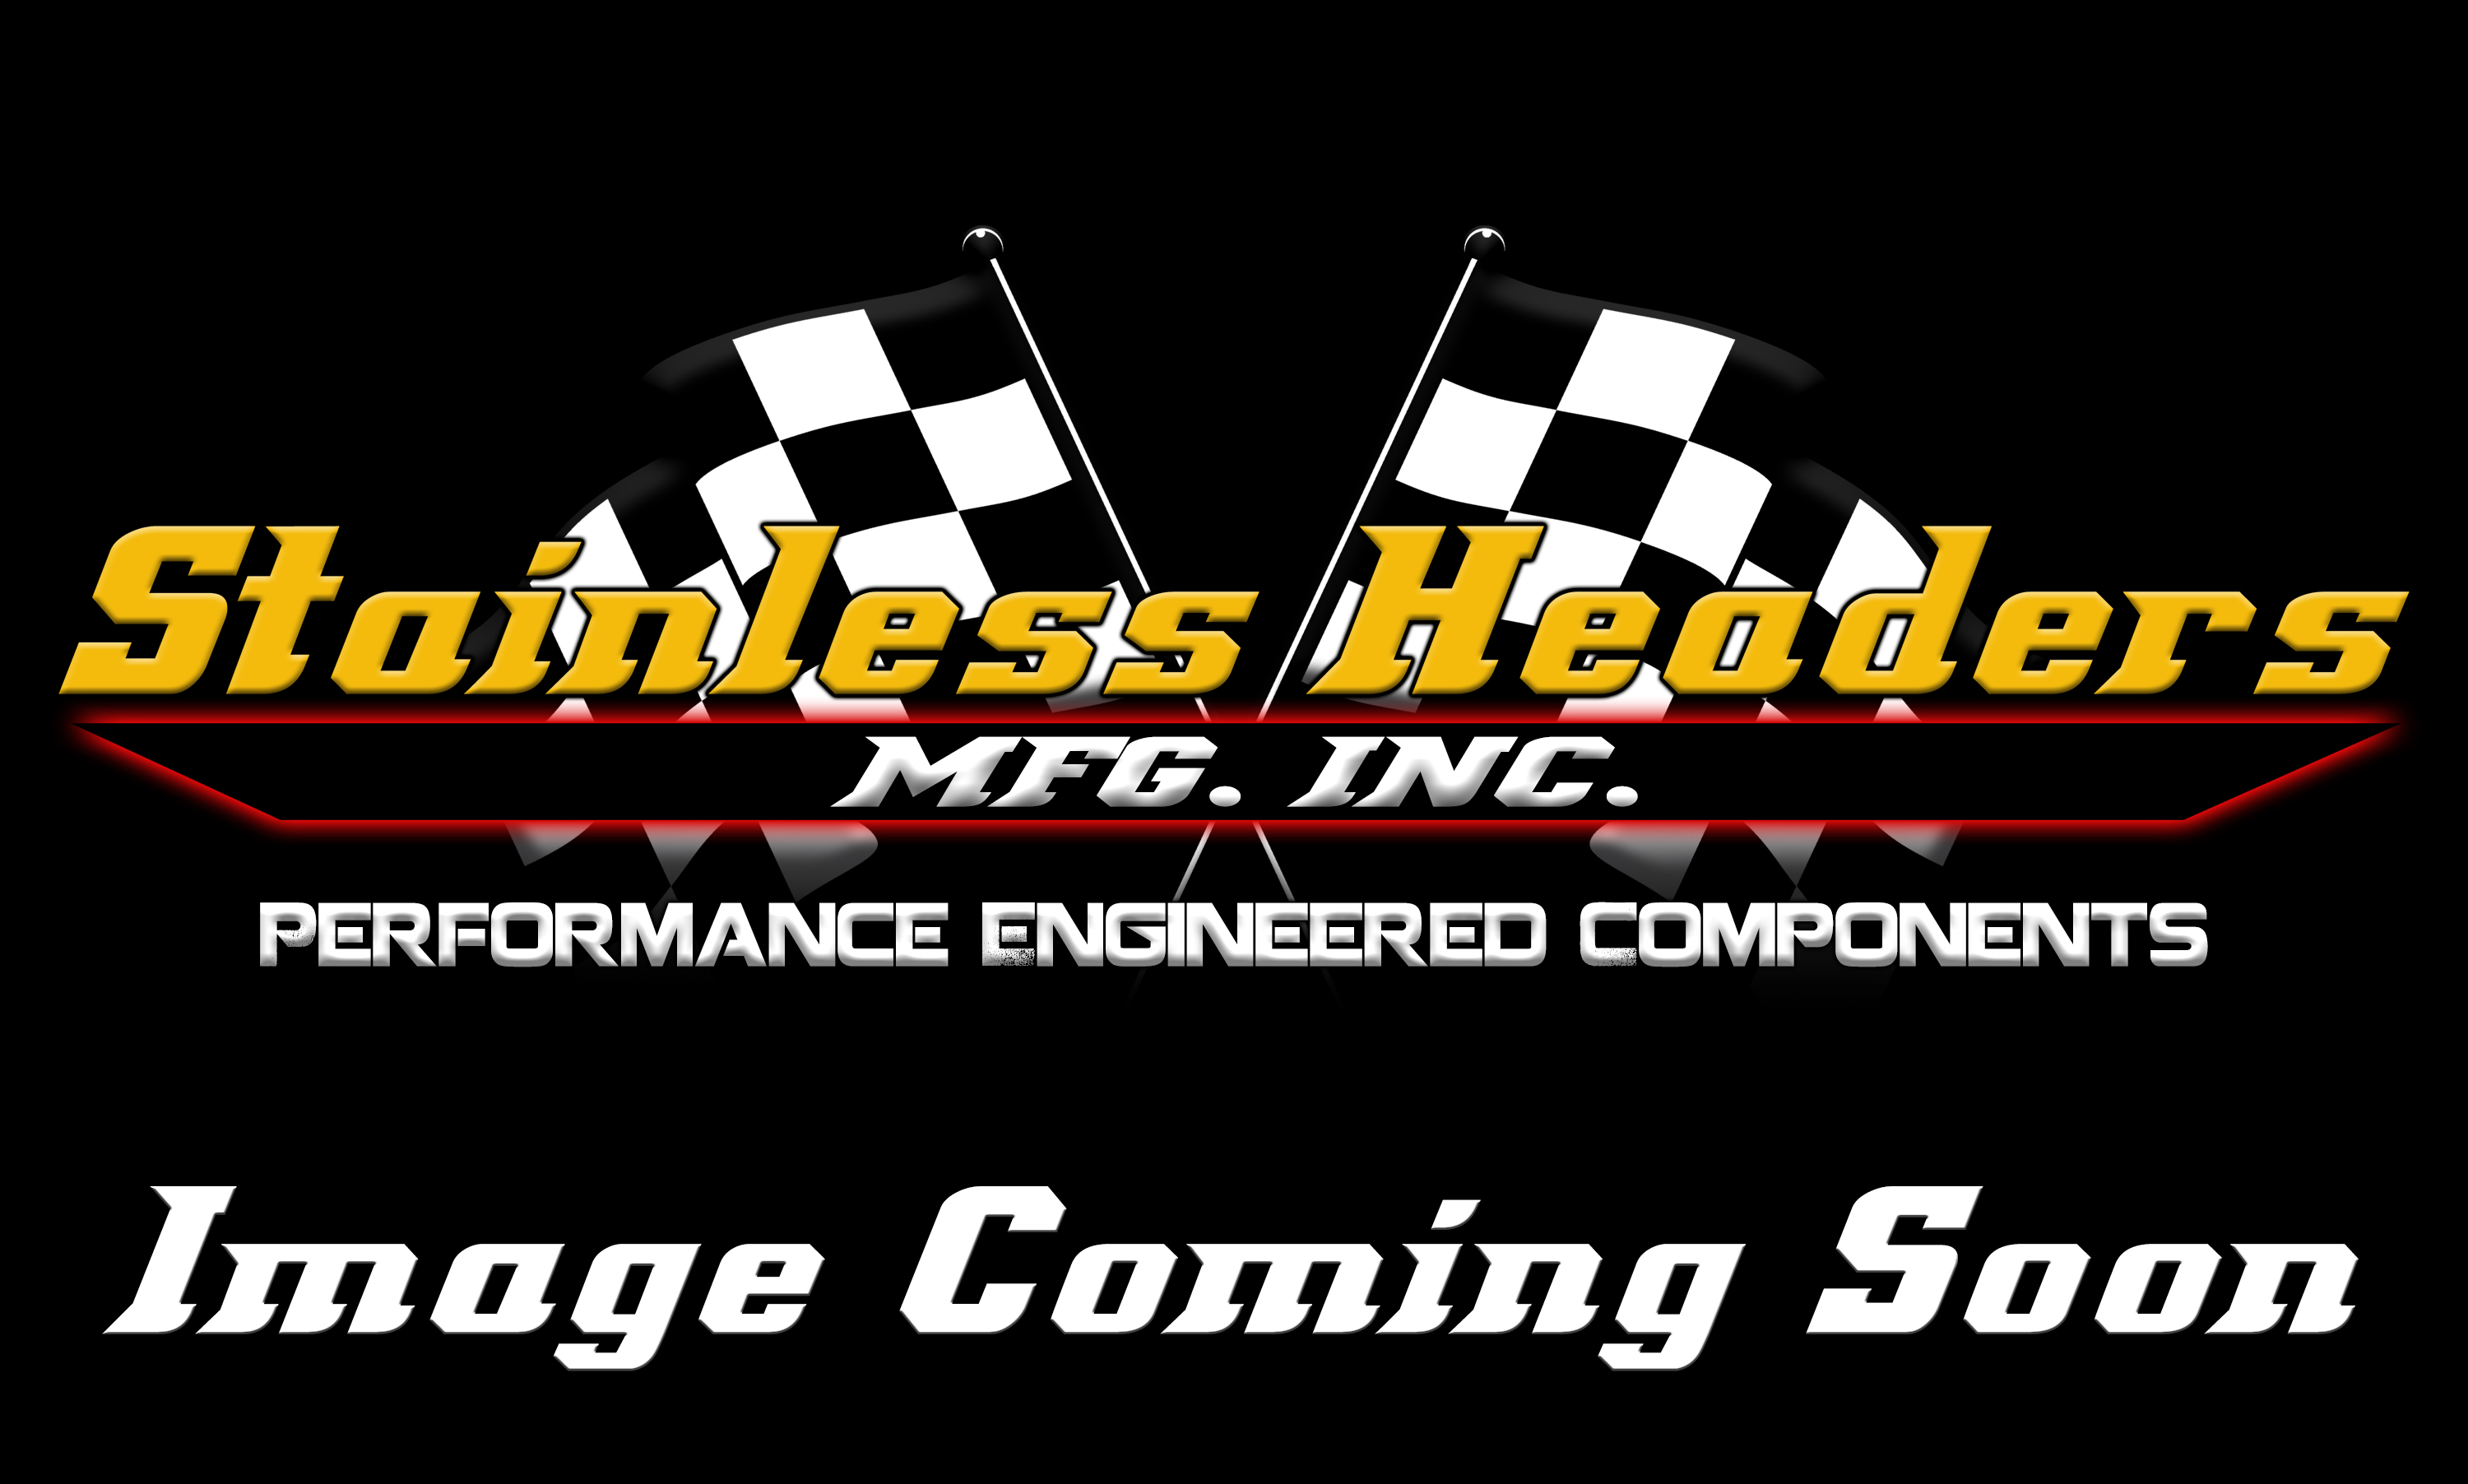 CompTurbo Technology Turbochargers - Comp Turbo Triple Ball Bearing Oil-Less 3.0 Turbochargers - CompTurbo Technologies - CTR4508R-8085 Mid Frame Oil-Less 3.0 Turbocharger (1350 HP)